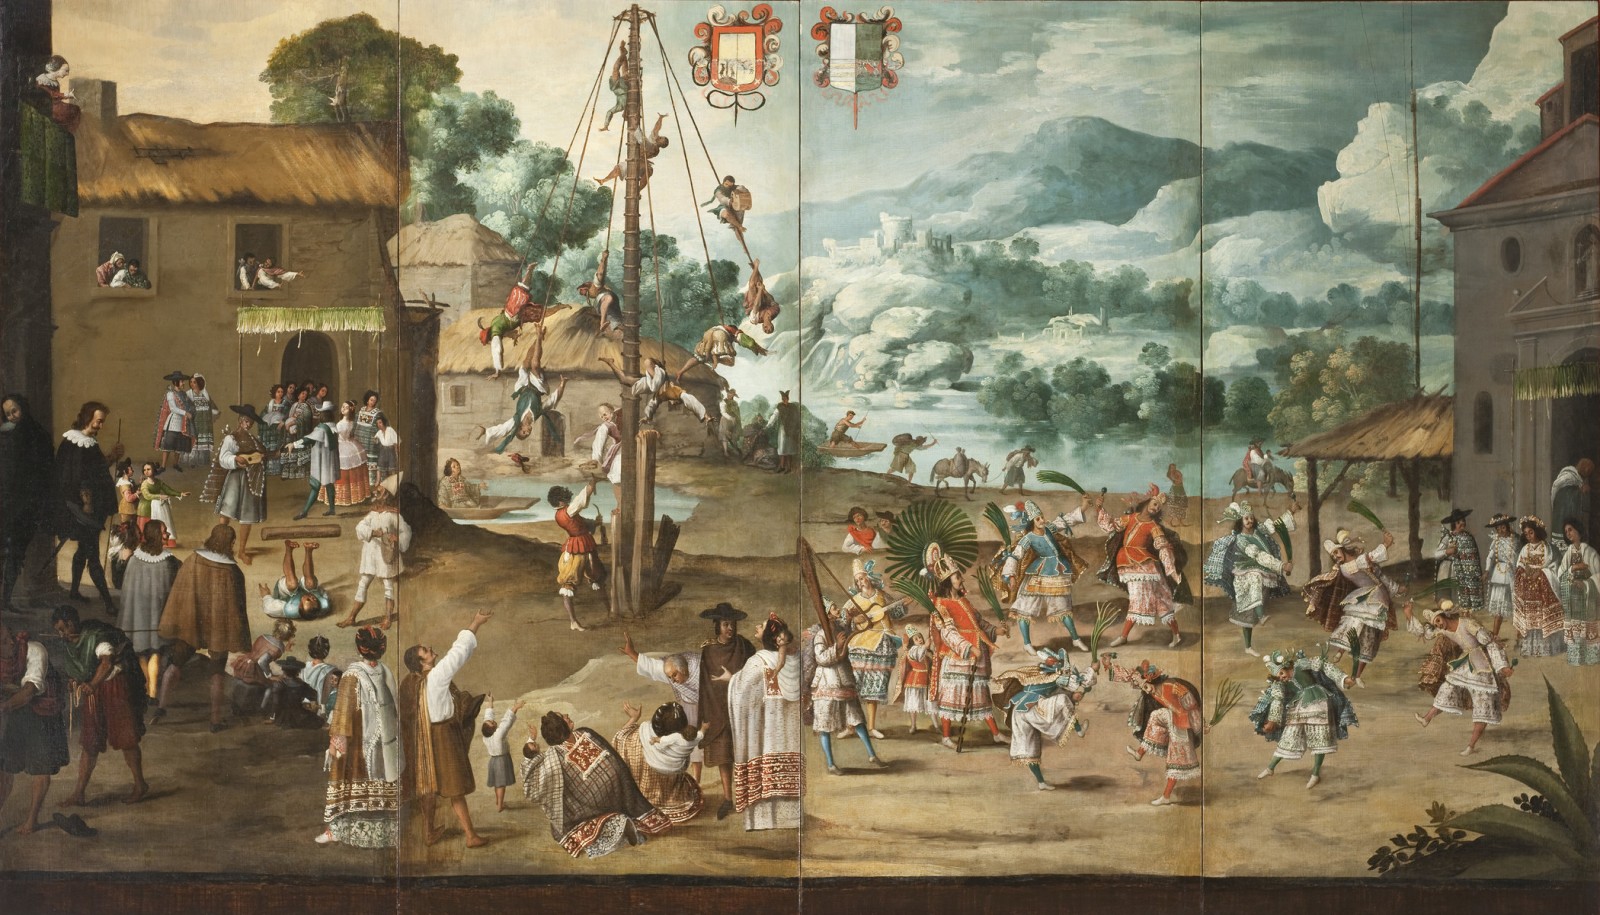 Contested Visions in the Spanish Colonial World | LACMA